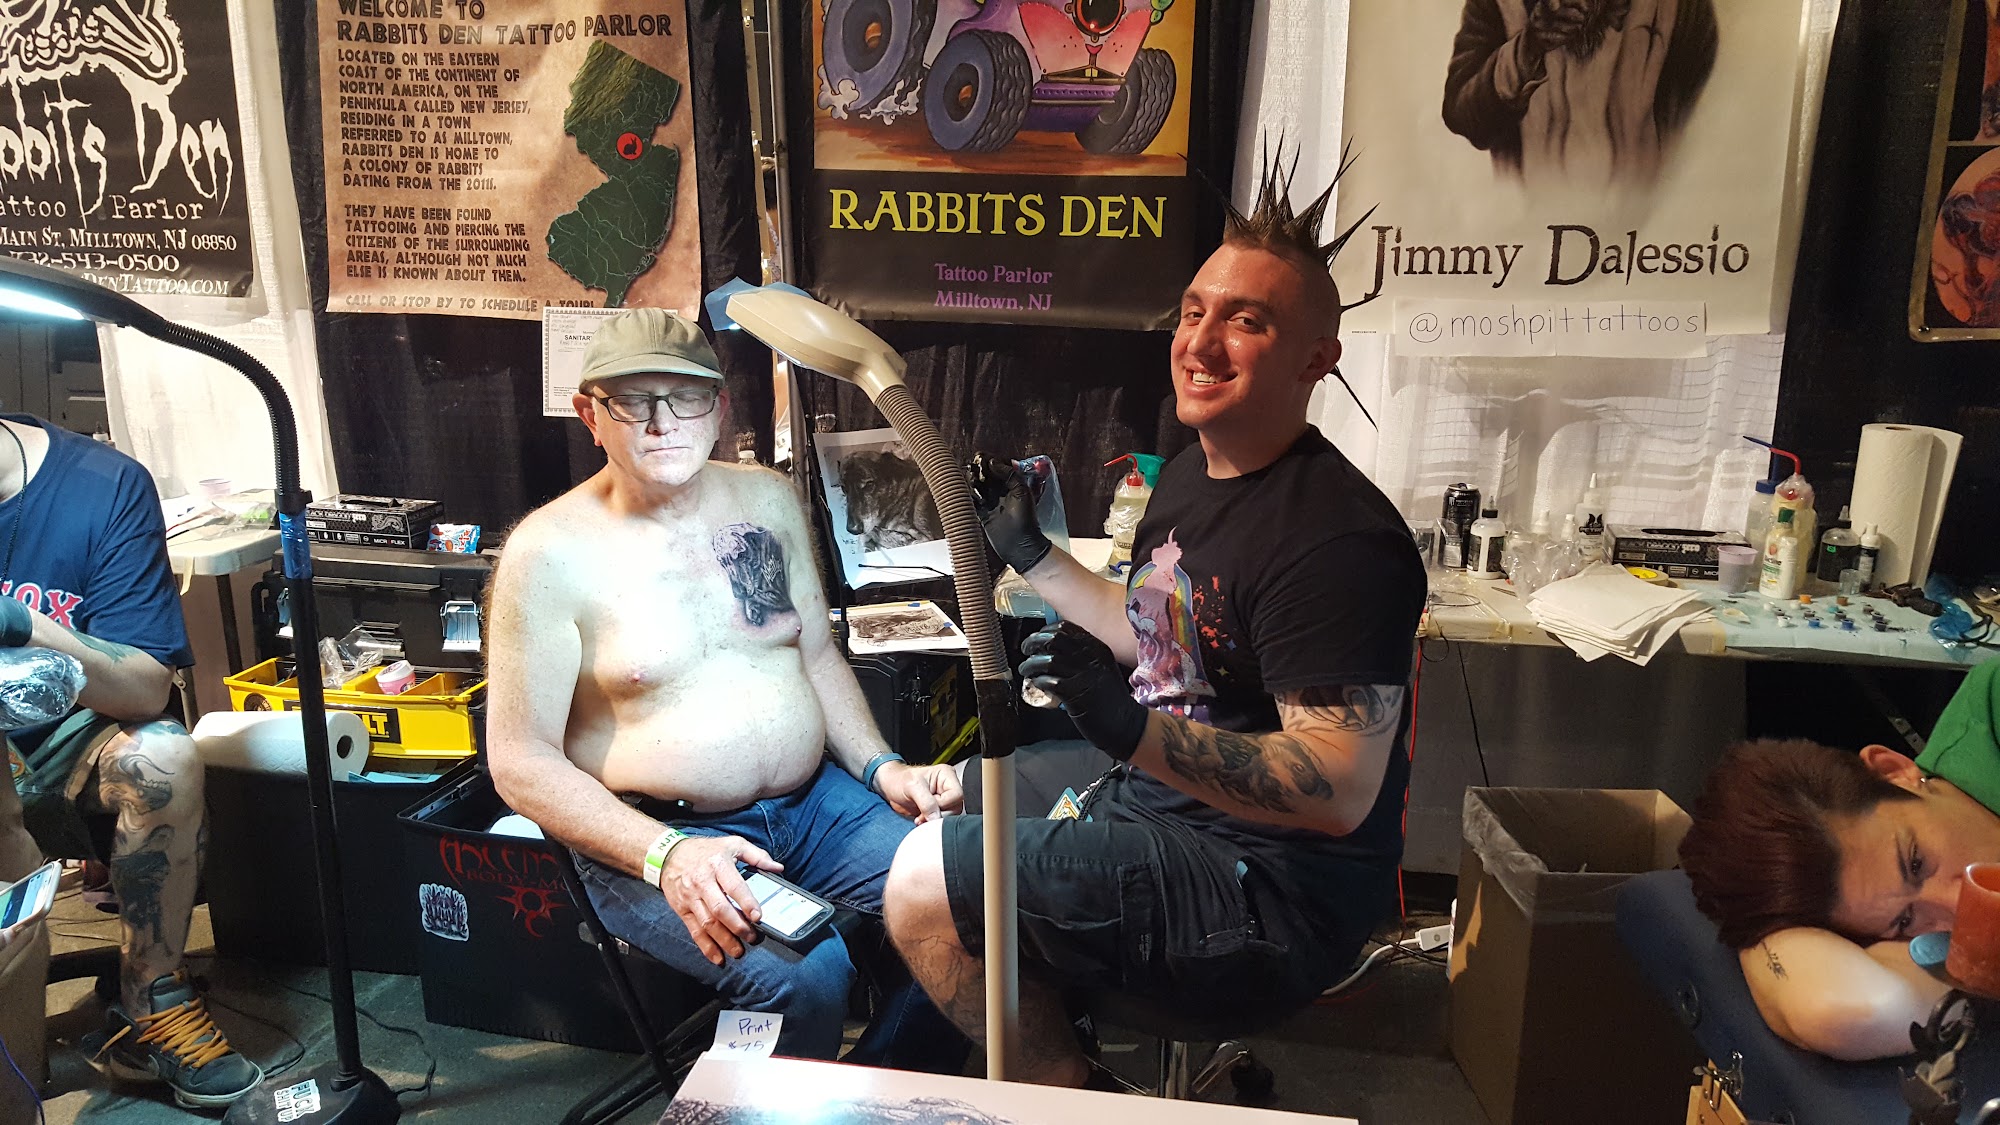 Rabbits Den Tattoo and Piercing Parlor 120 N Main St Suite #201, Milltown New Jersey 08850